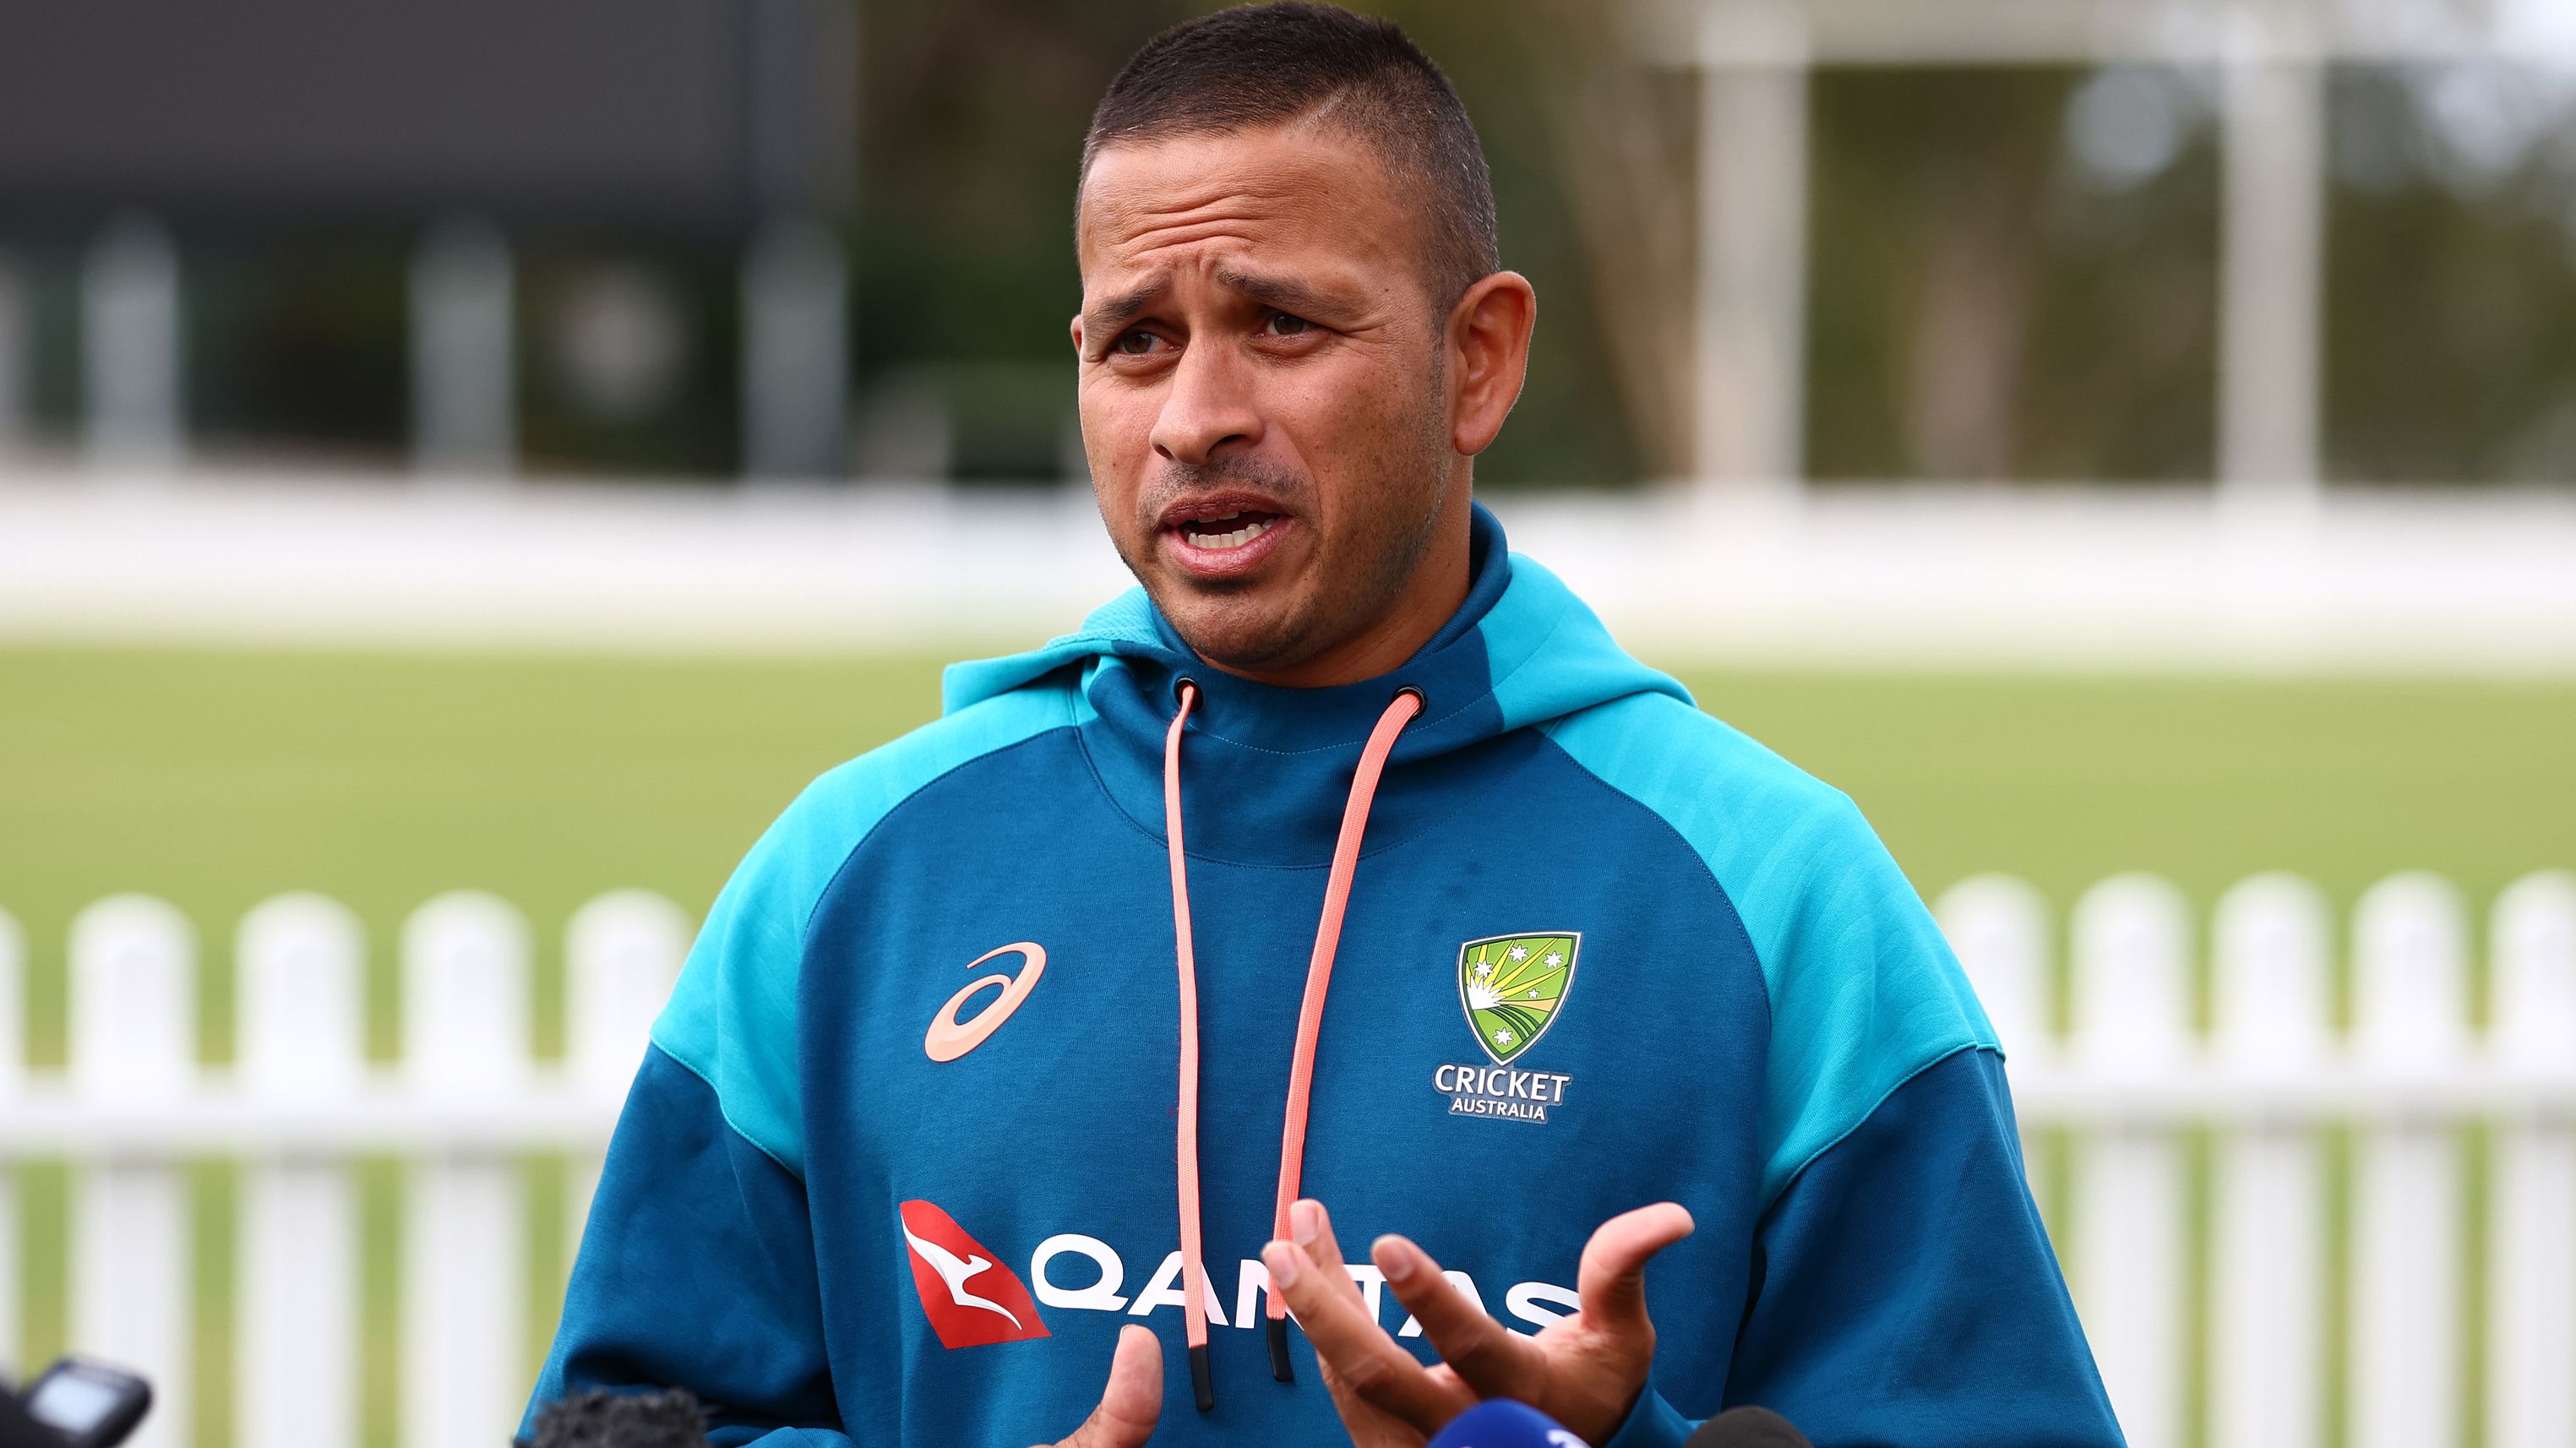 BRISBANE, AUSTRALIA - MAY 15: Usman Khawaja speaks to the media during a Cricket Australia media opportunity after the announcement of the 2023/24 International Season at Allan Border Field  on May 15, 2023 in Brisbane, Australia. (Photo by Chris Hyde/Getty Images)